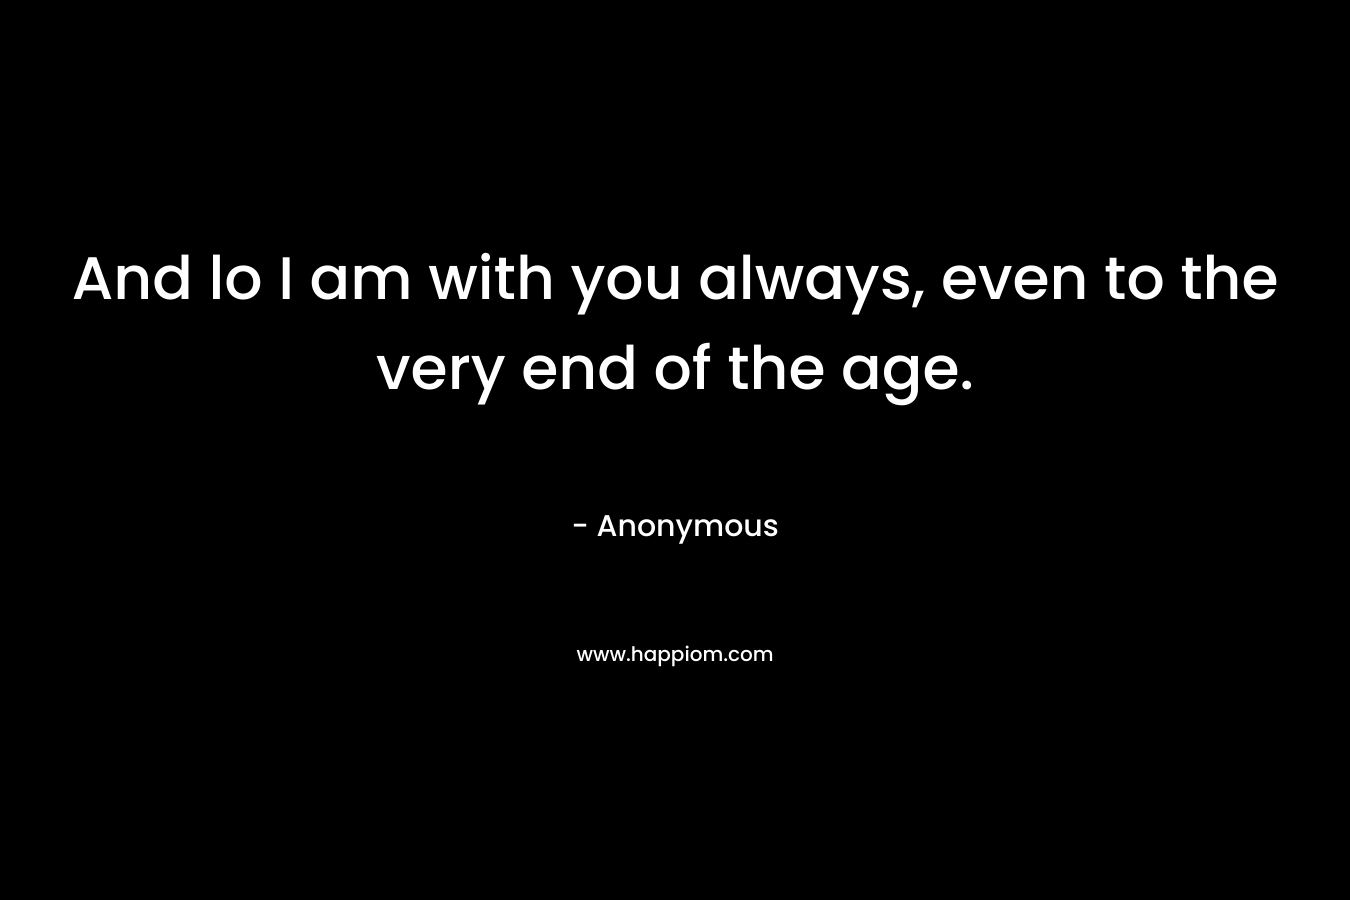 And lo I am with you always, even to the very end of the age. – Anonymous